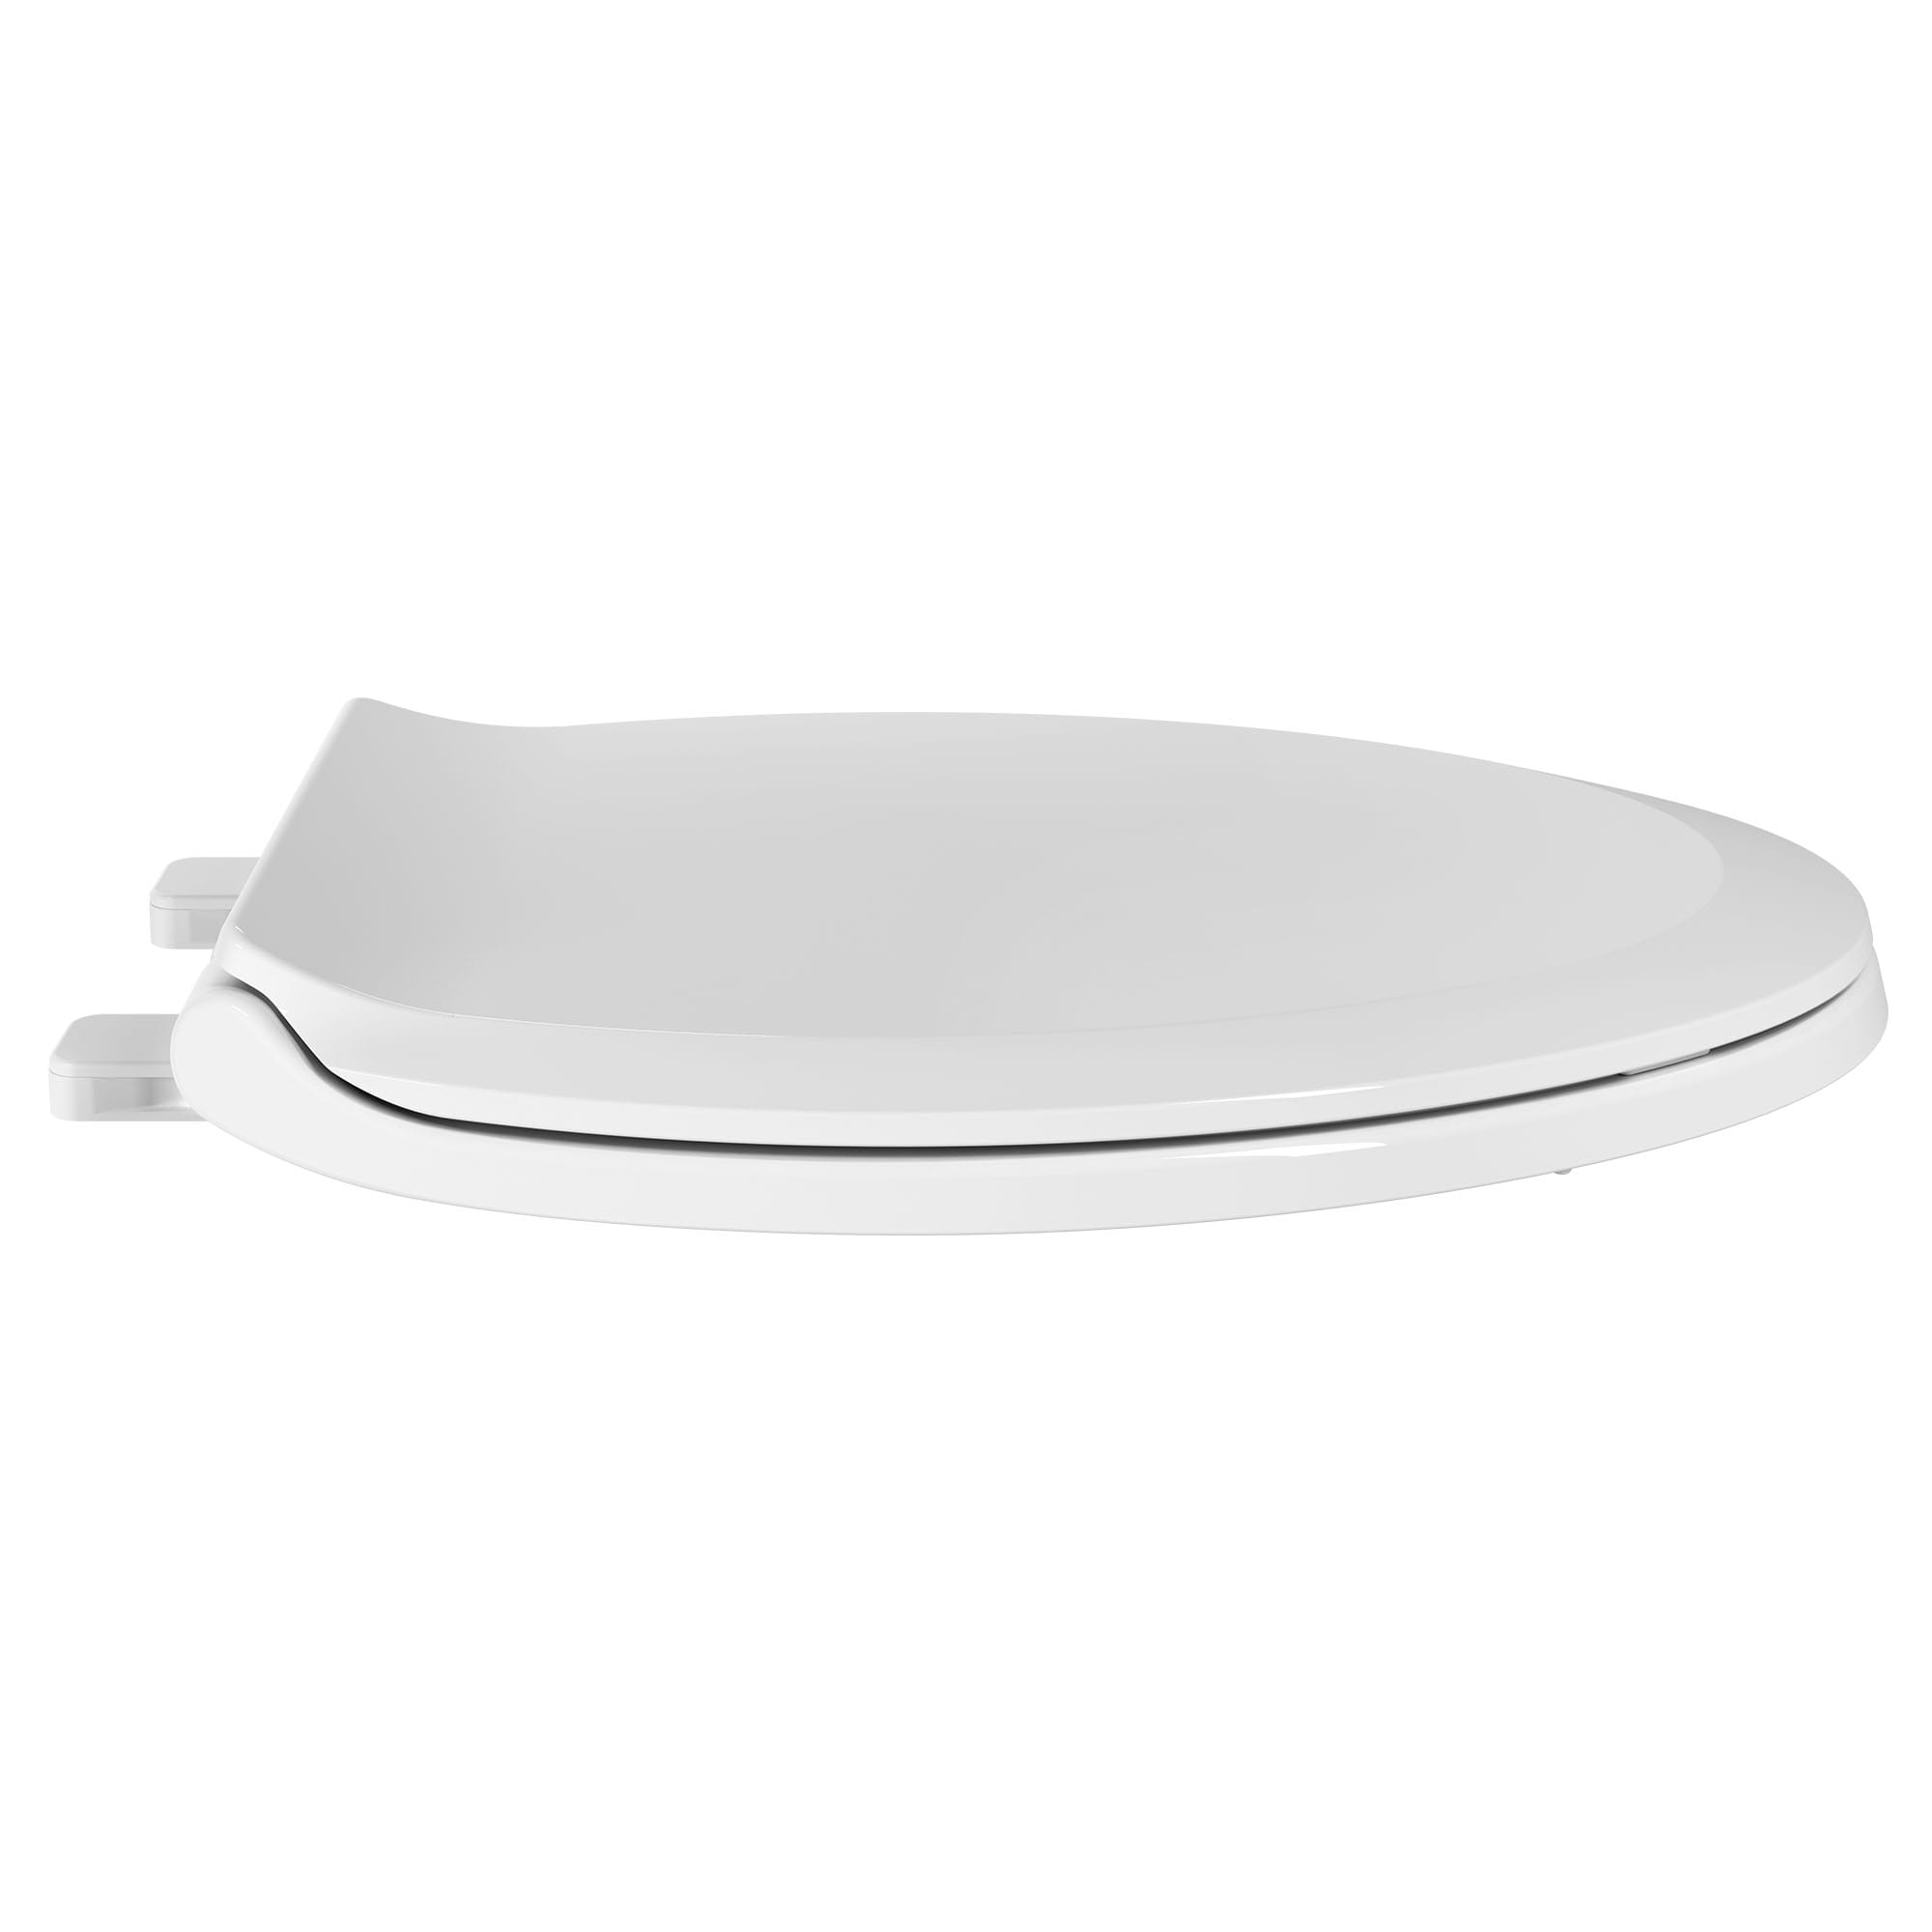 American Standard Cadet Elongated Slow Closed Toilet Seat 5257115020 for sale online 